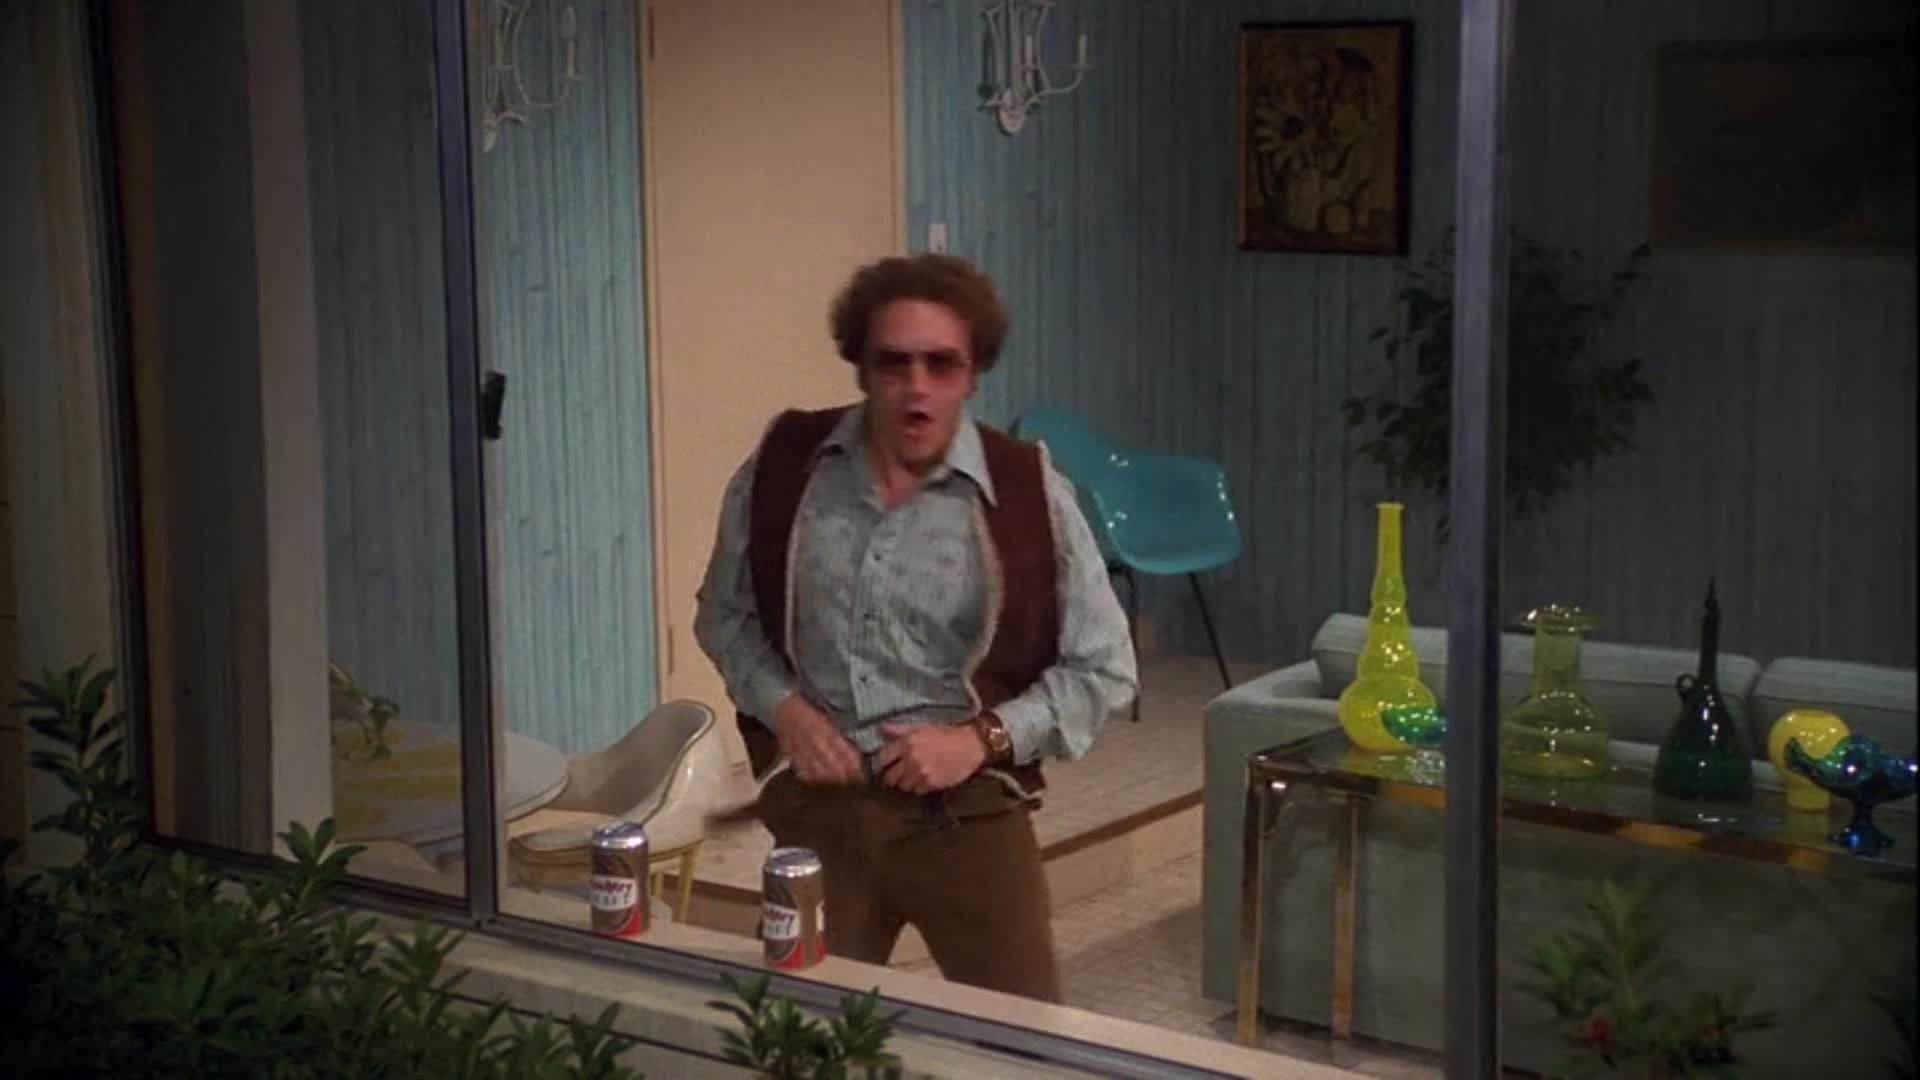 Hyde moons Fez on That 70s Show